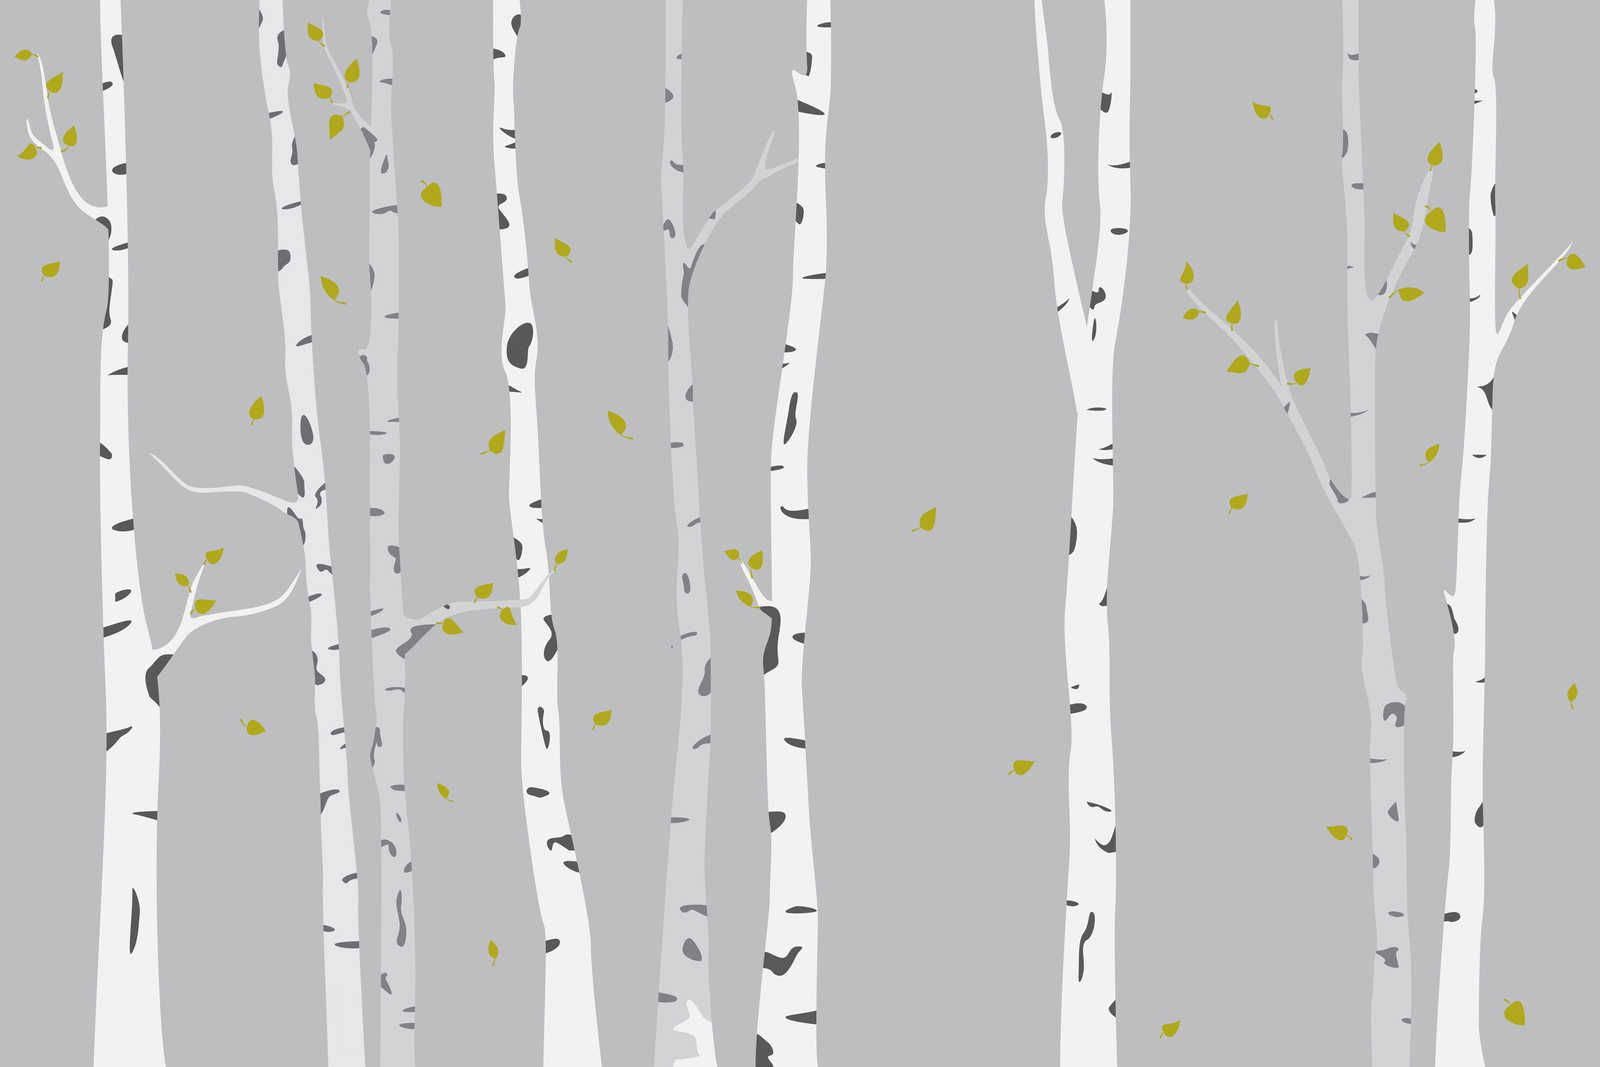             Canvas with painted birch forest for children's room - 120 cm x 80 cm
        